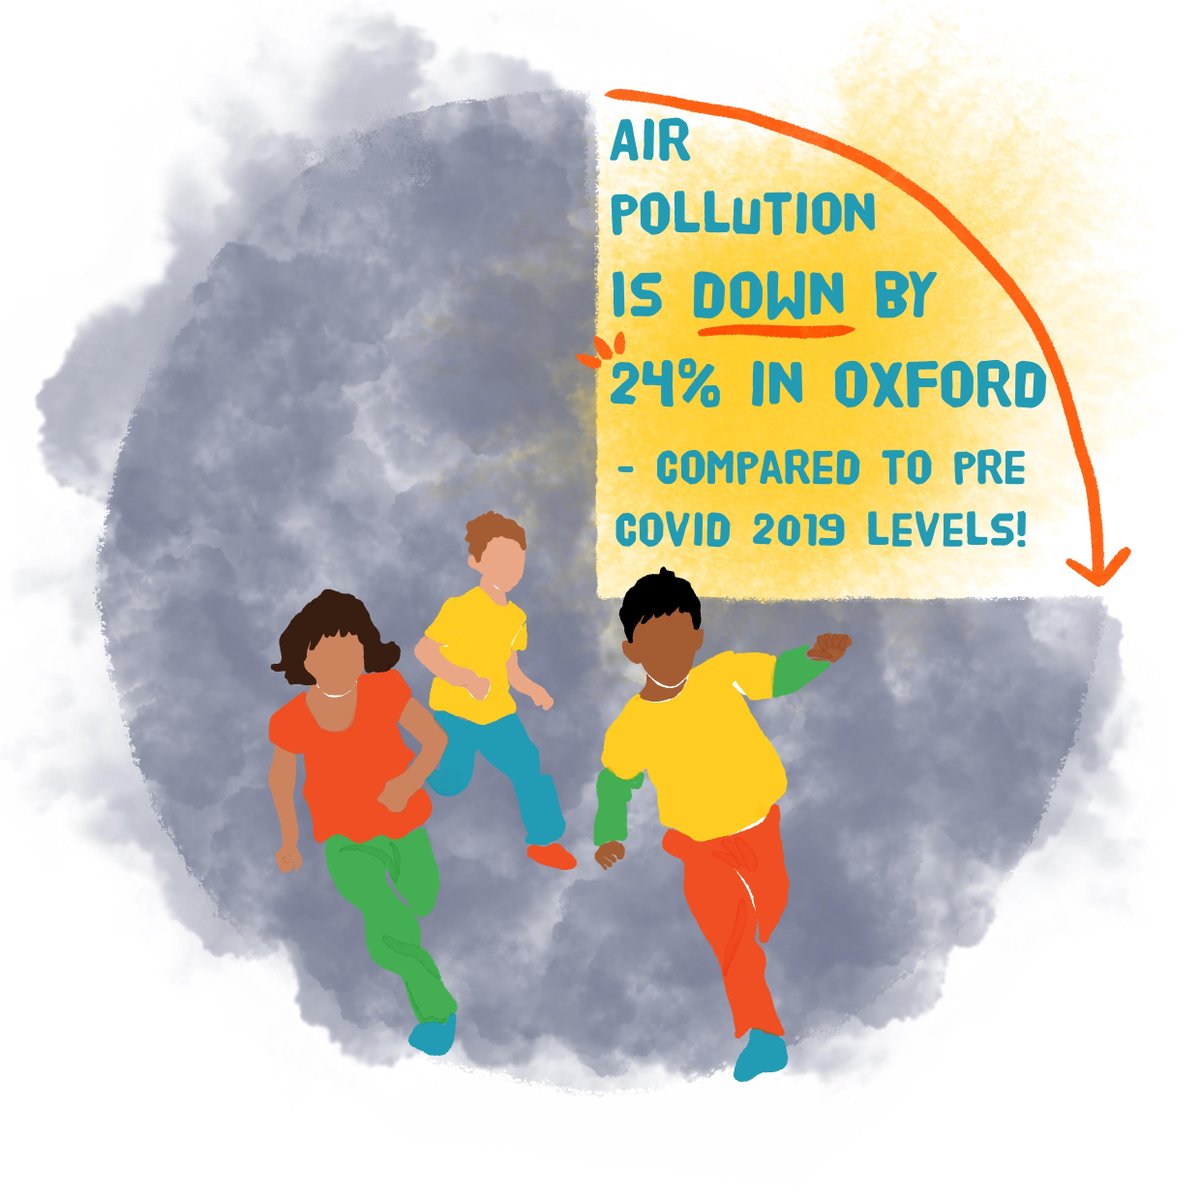 ✊Great news that pollution is down in Oxford by nearly 1/4, thanks to measures like: 
🌫️the Zero Emissions Zone
🌳low traffic neighbourhoods 
🔌shift to electric vehicles

Still more to do in areas like the Plain, but good progress.... #CleanAirDay2023 

oxford.gov.uk/news/article/2…